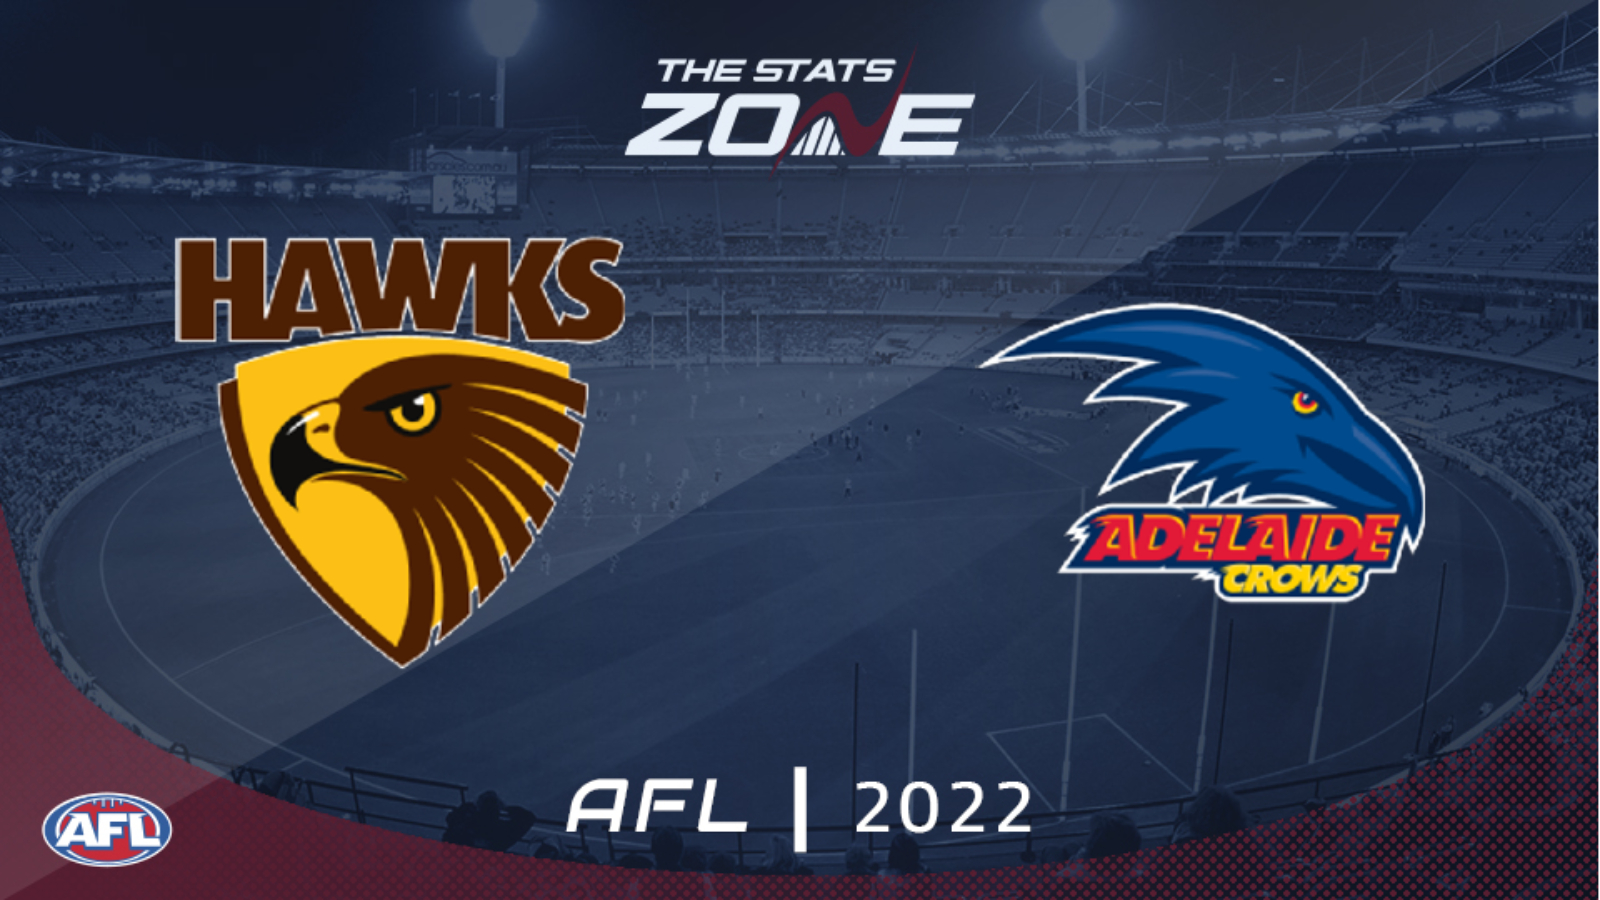 Hawthorn Vs Adelaide Crows Round 17 Preview And Prediction 2022 Afl The Stats Zone